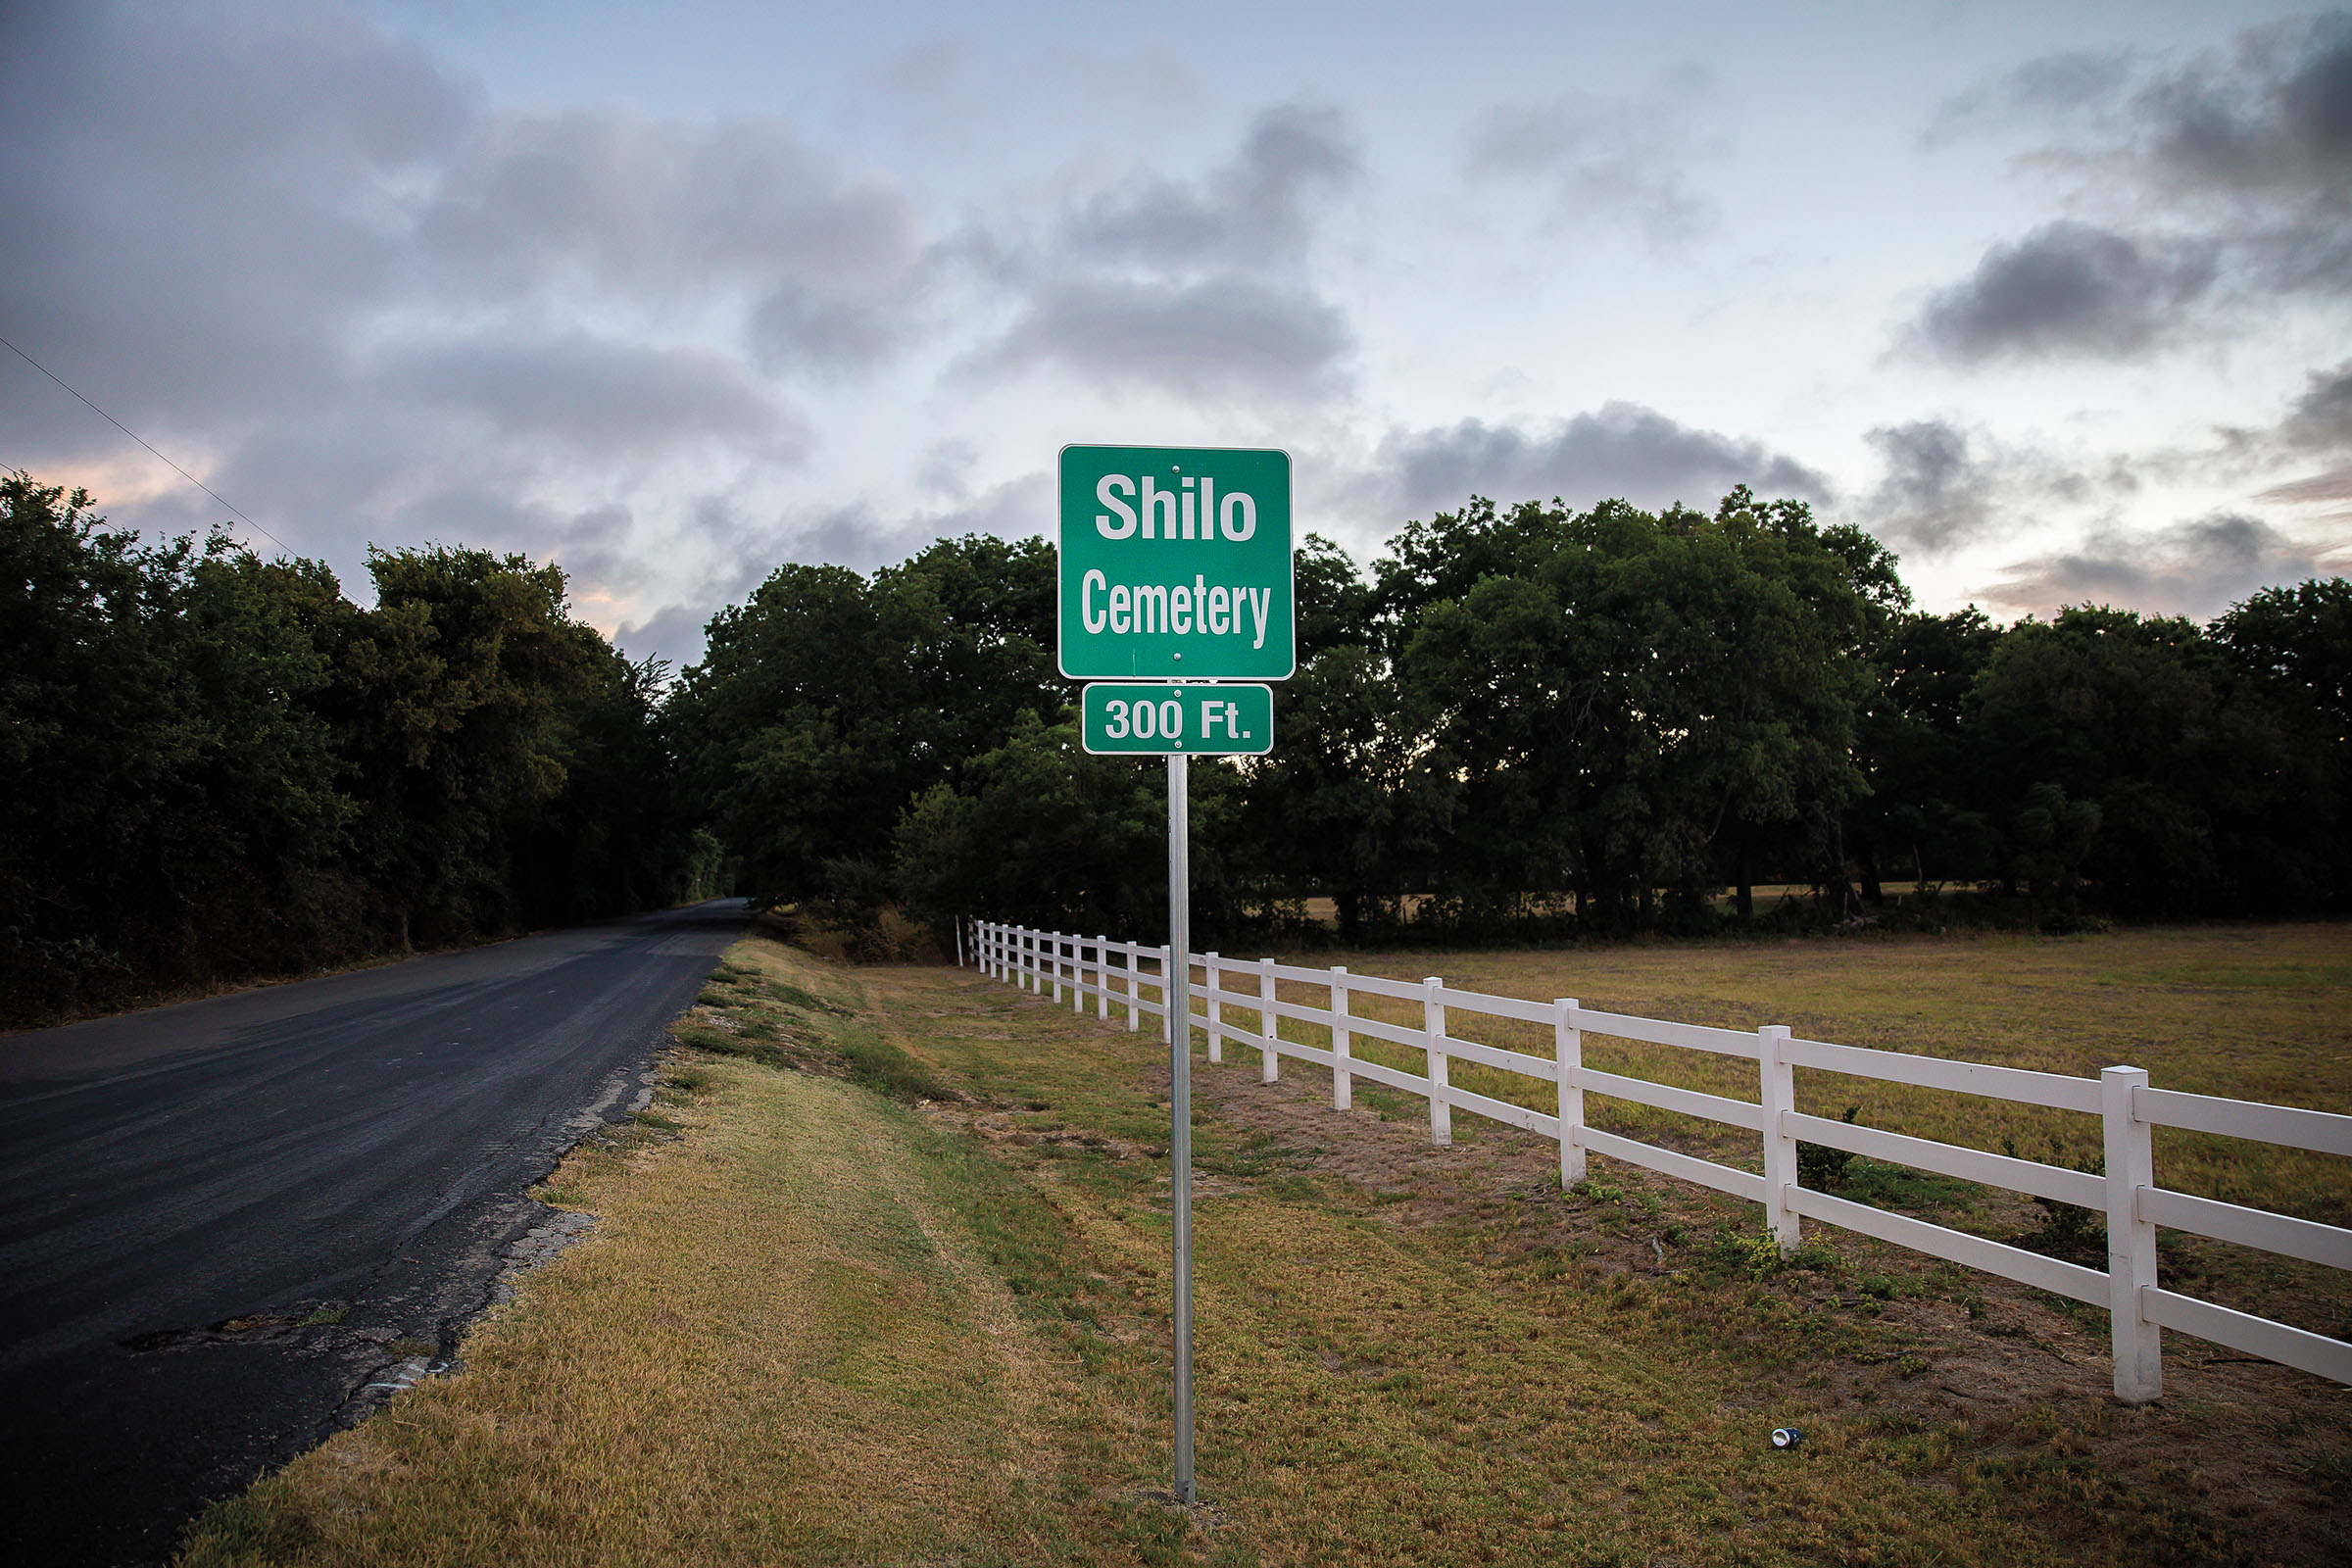 A green sign along a road reading "Shilo [sic] Cemetery"